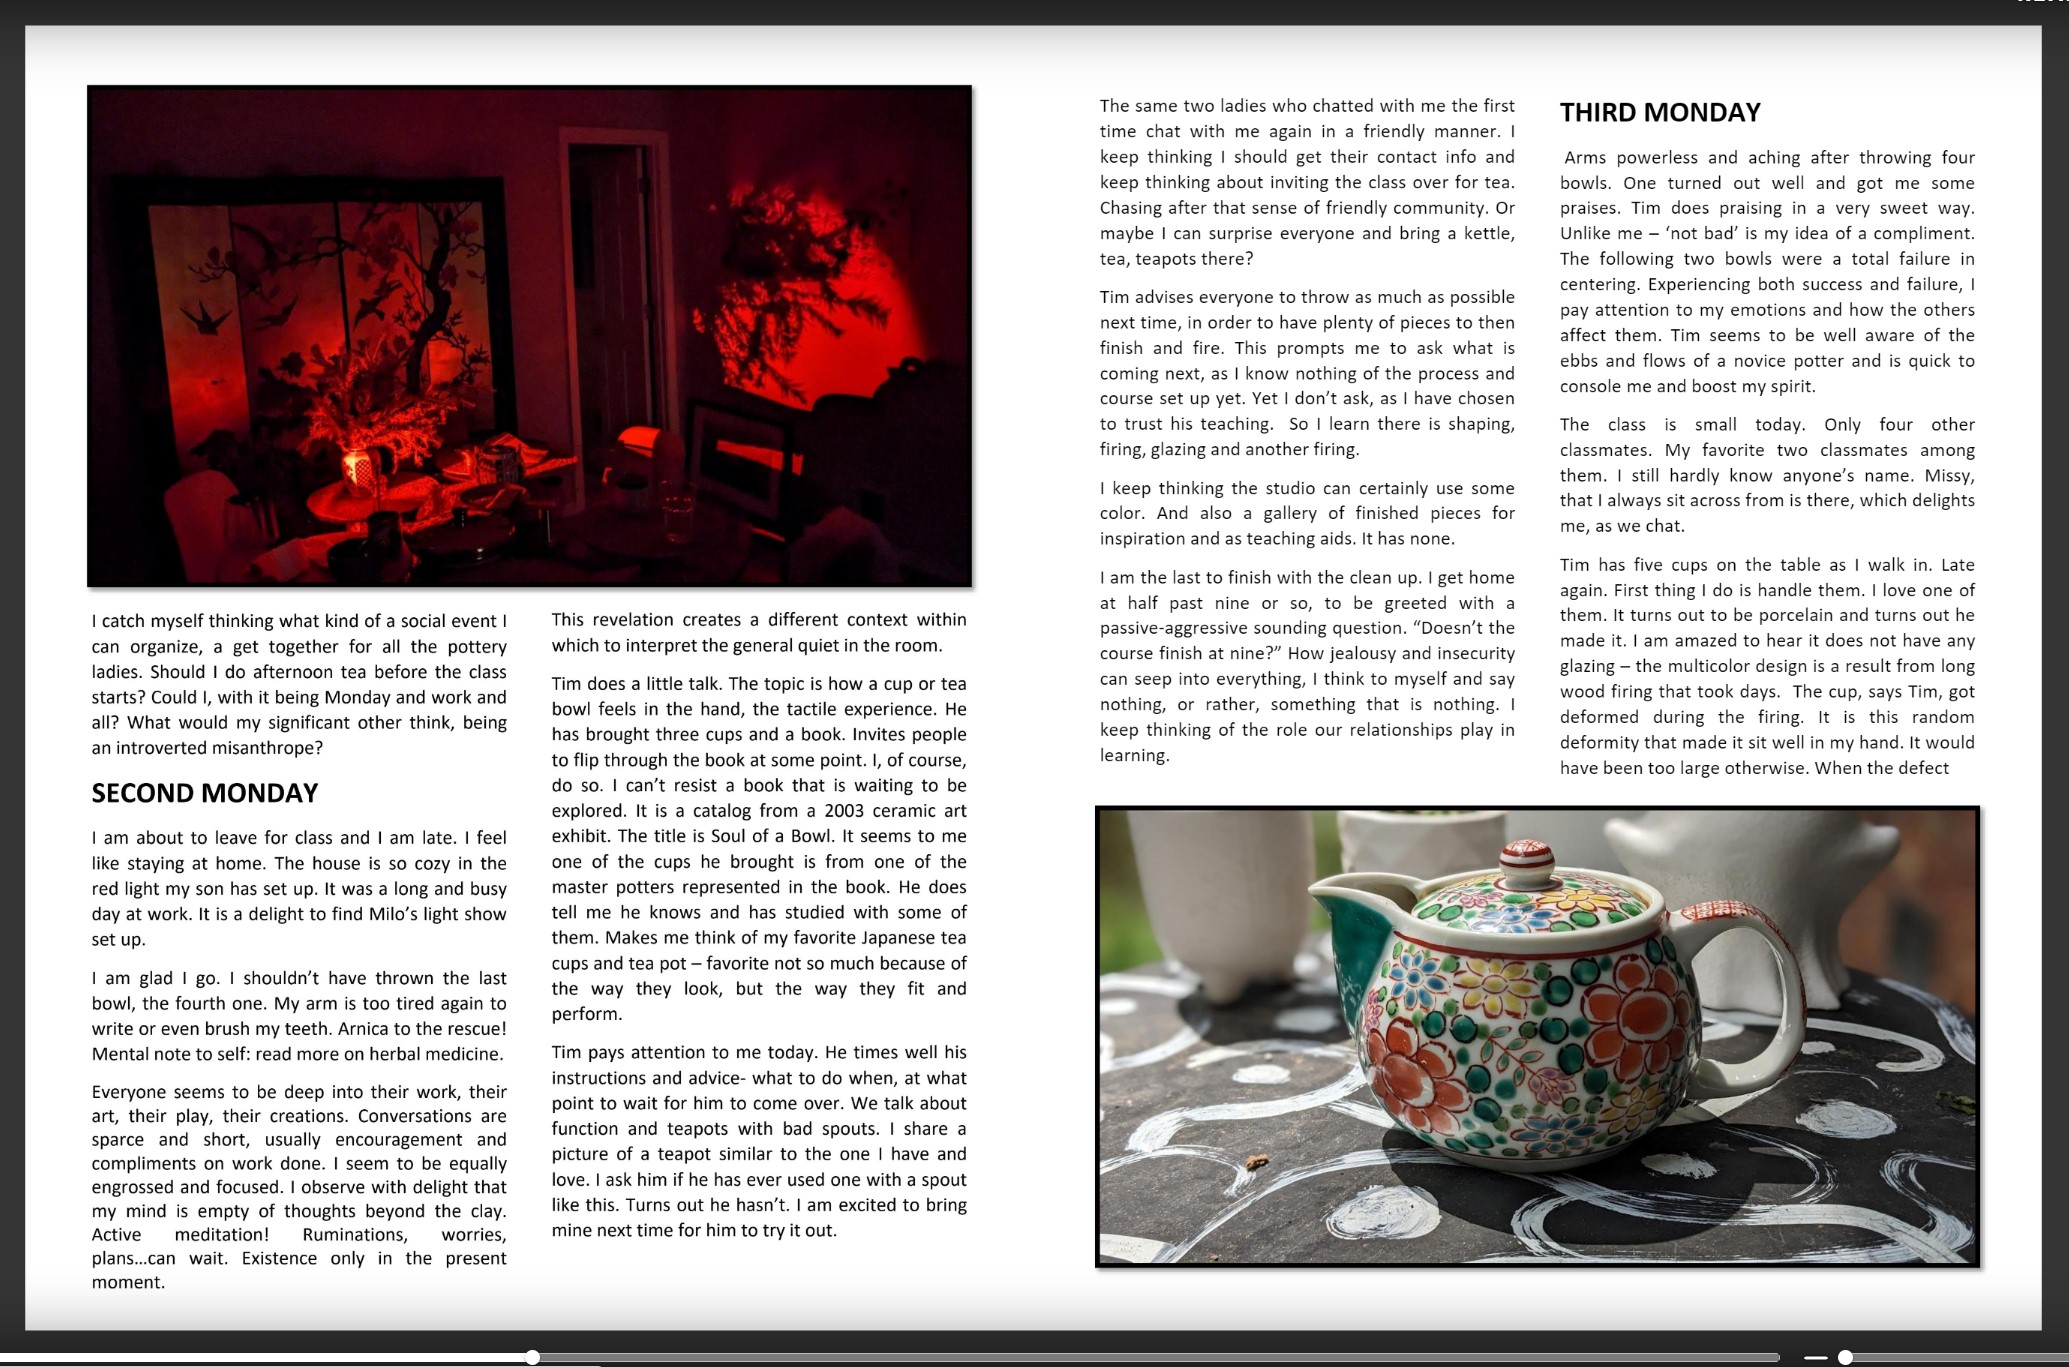 Diary of an Adult Pottery Adventure / Screenshot of pages 4 and 5 from "Diary of an Adult Pottery Adventure", an autoethnographic a/r/tography project, available to view at https://issuu.com/home/published/diary